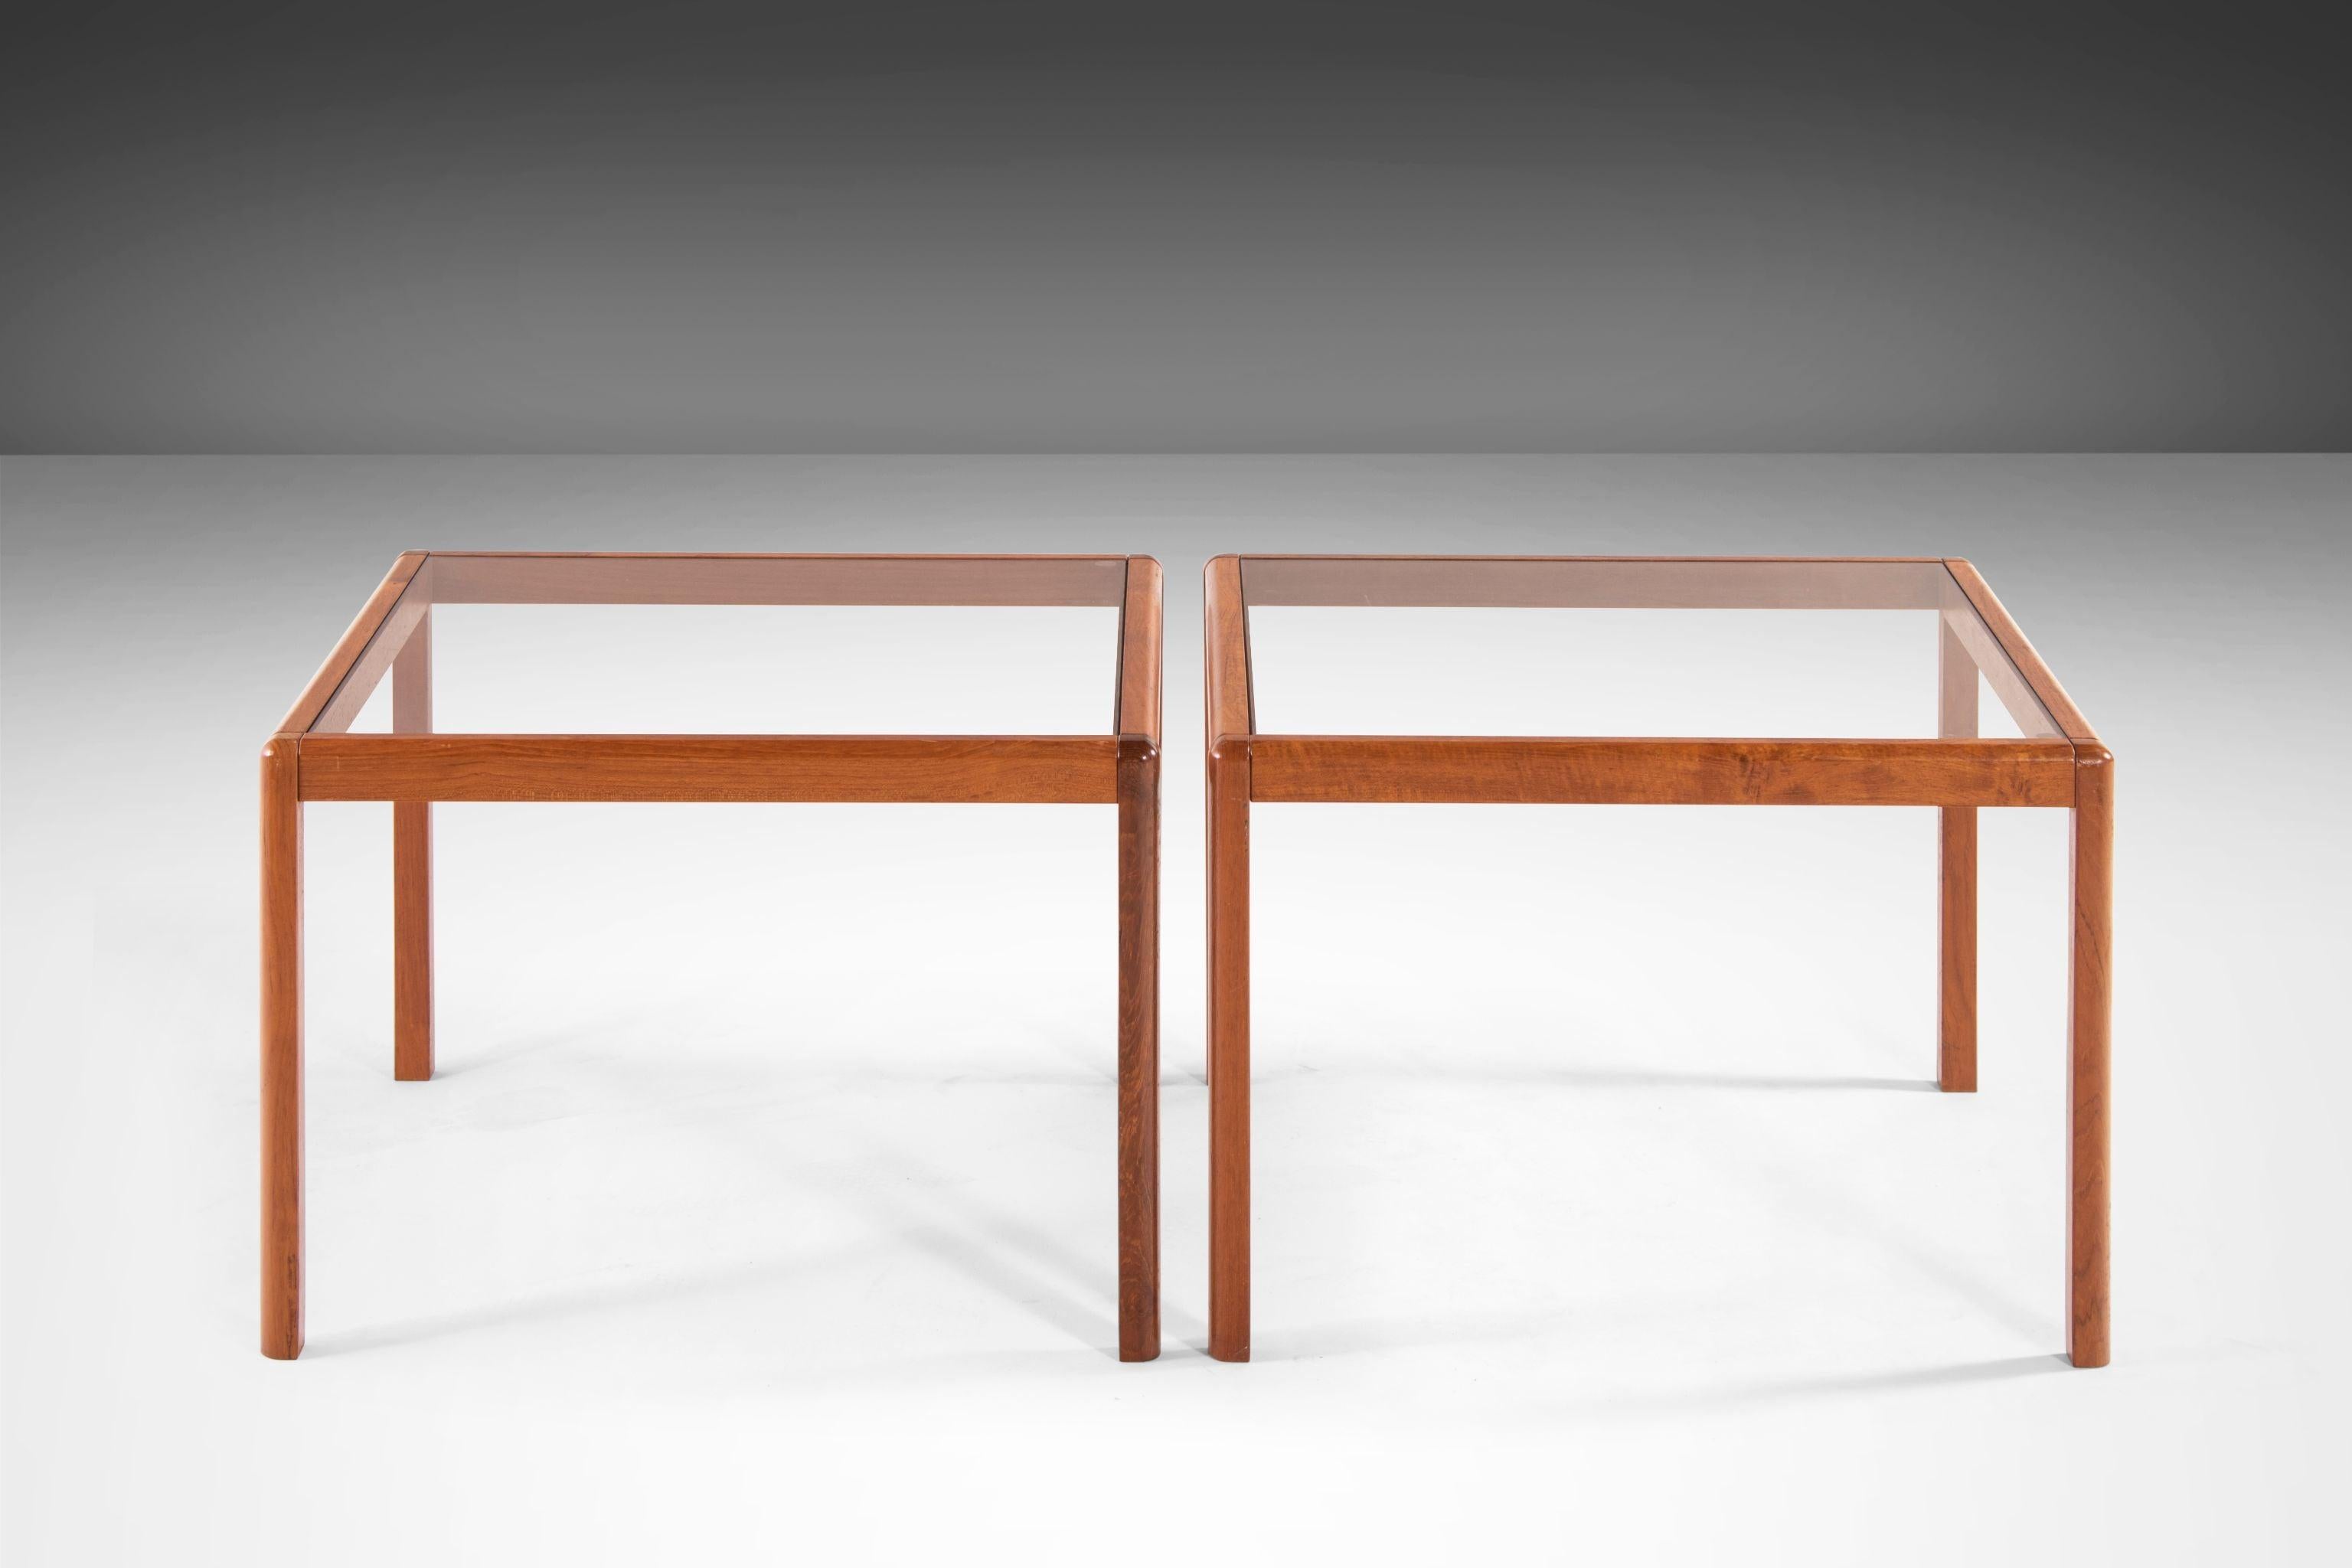 Minimalist Danish Modern Teak End Tables with Smoked Glass Tops, c. 1970's 1